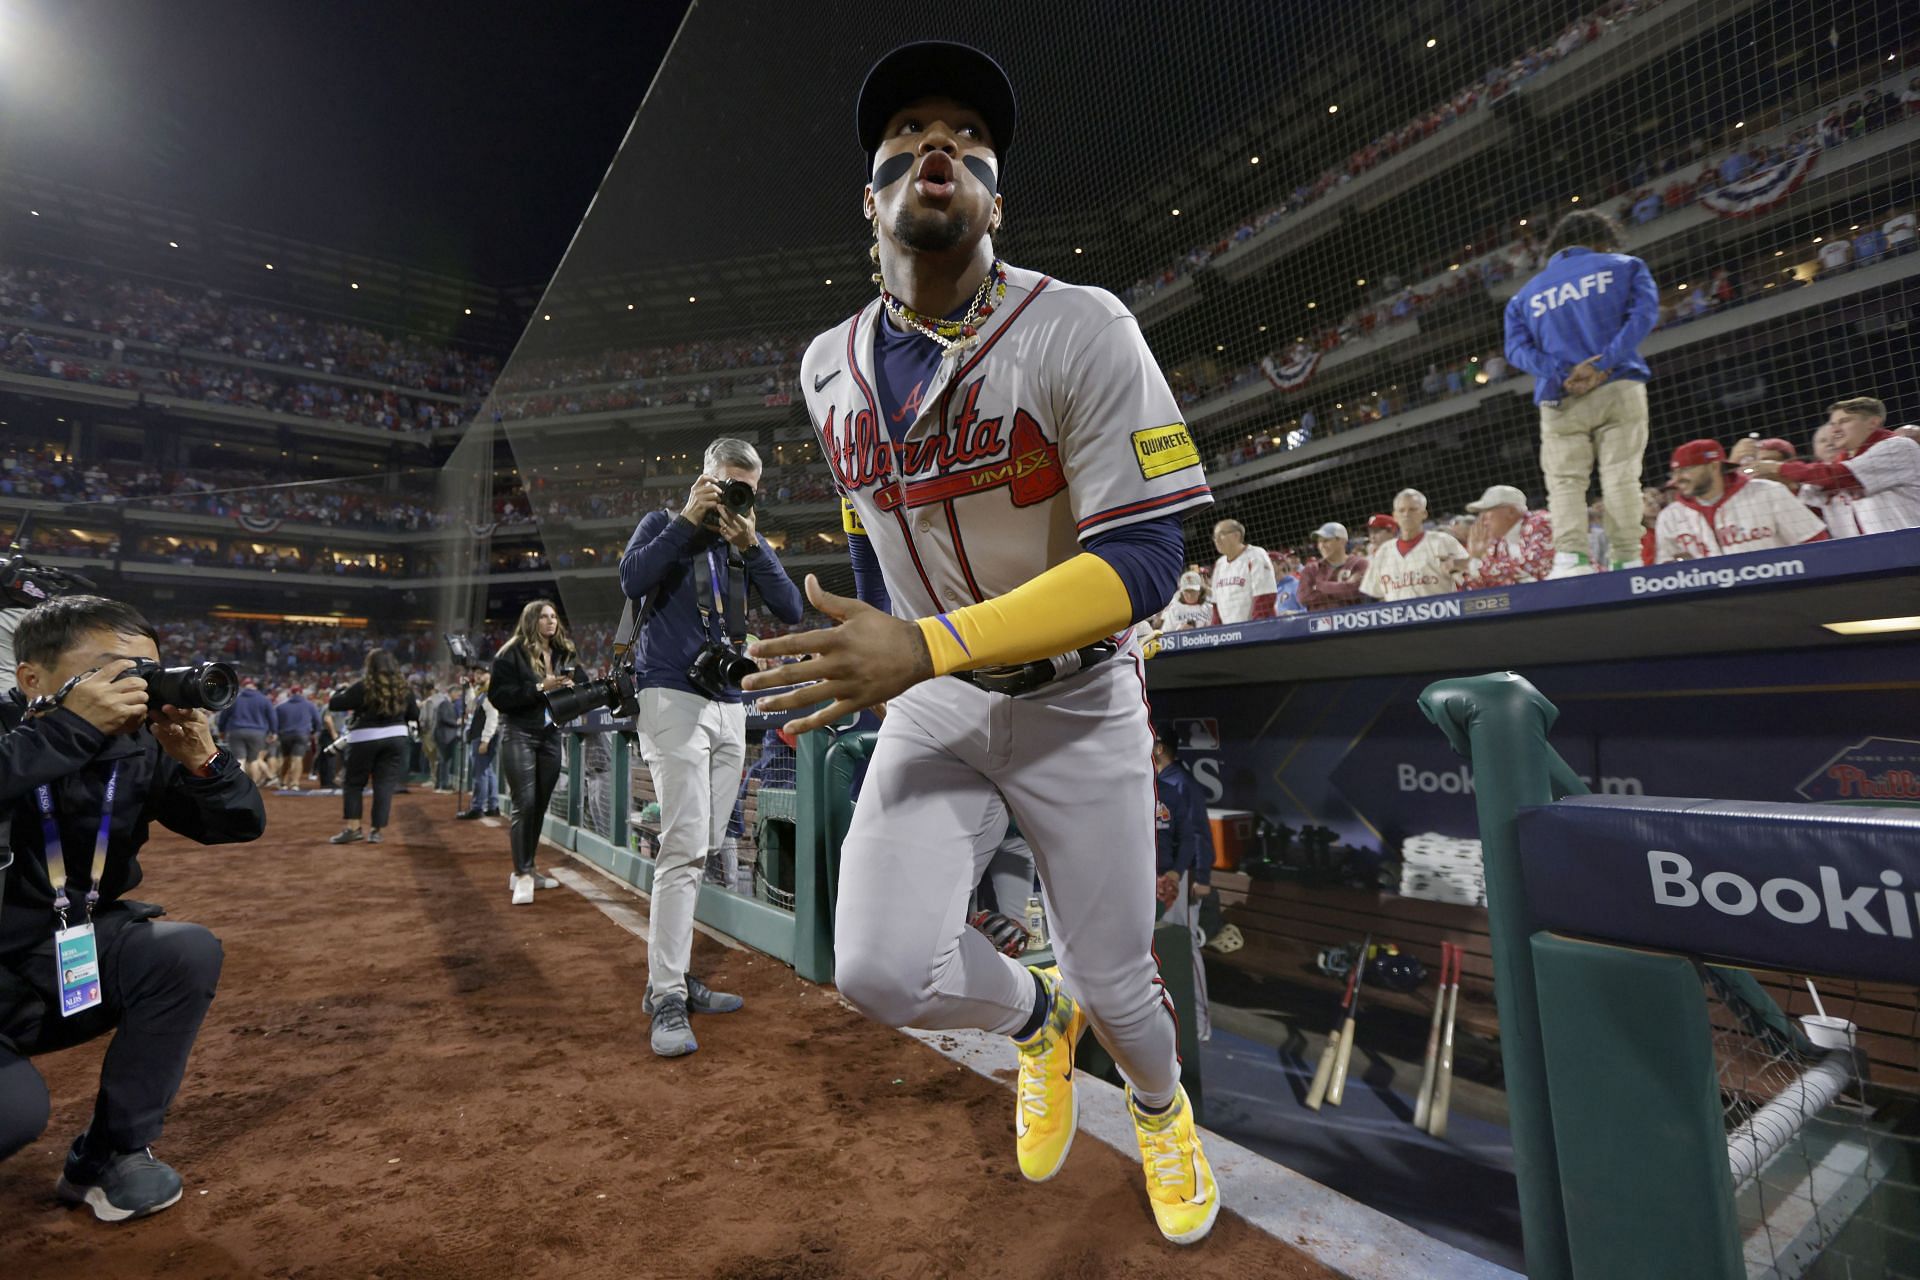 Ronald Acuna Jr. voted 2023 Player of the Year by MLB peers, Braves fans  hail star's dominance: "Beyond well deserved"